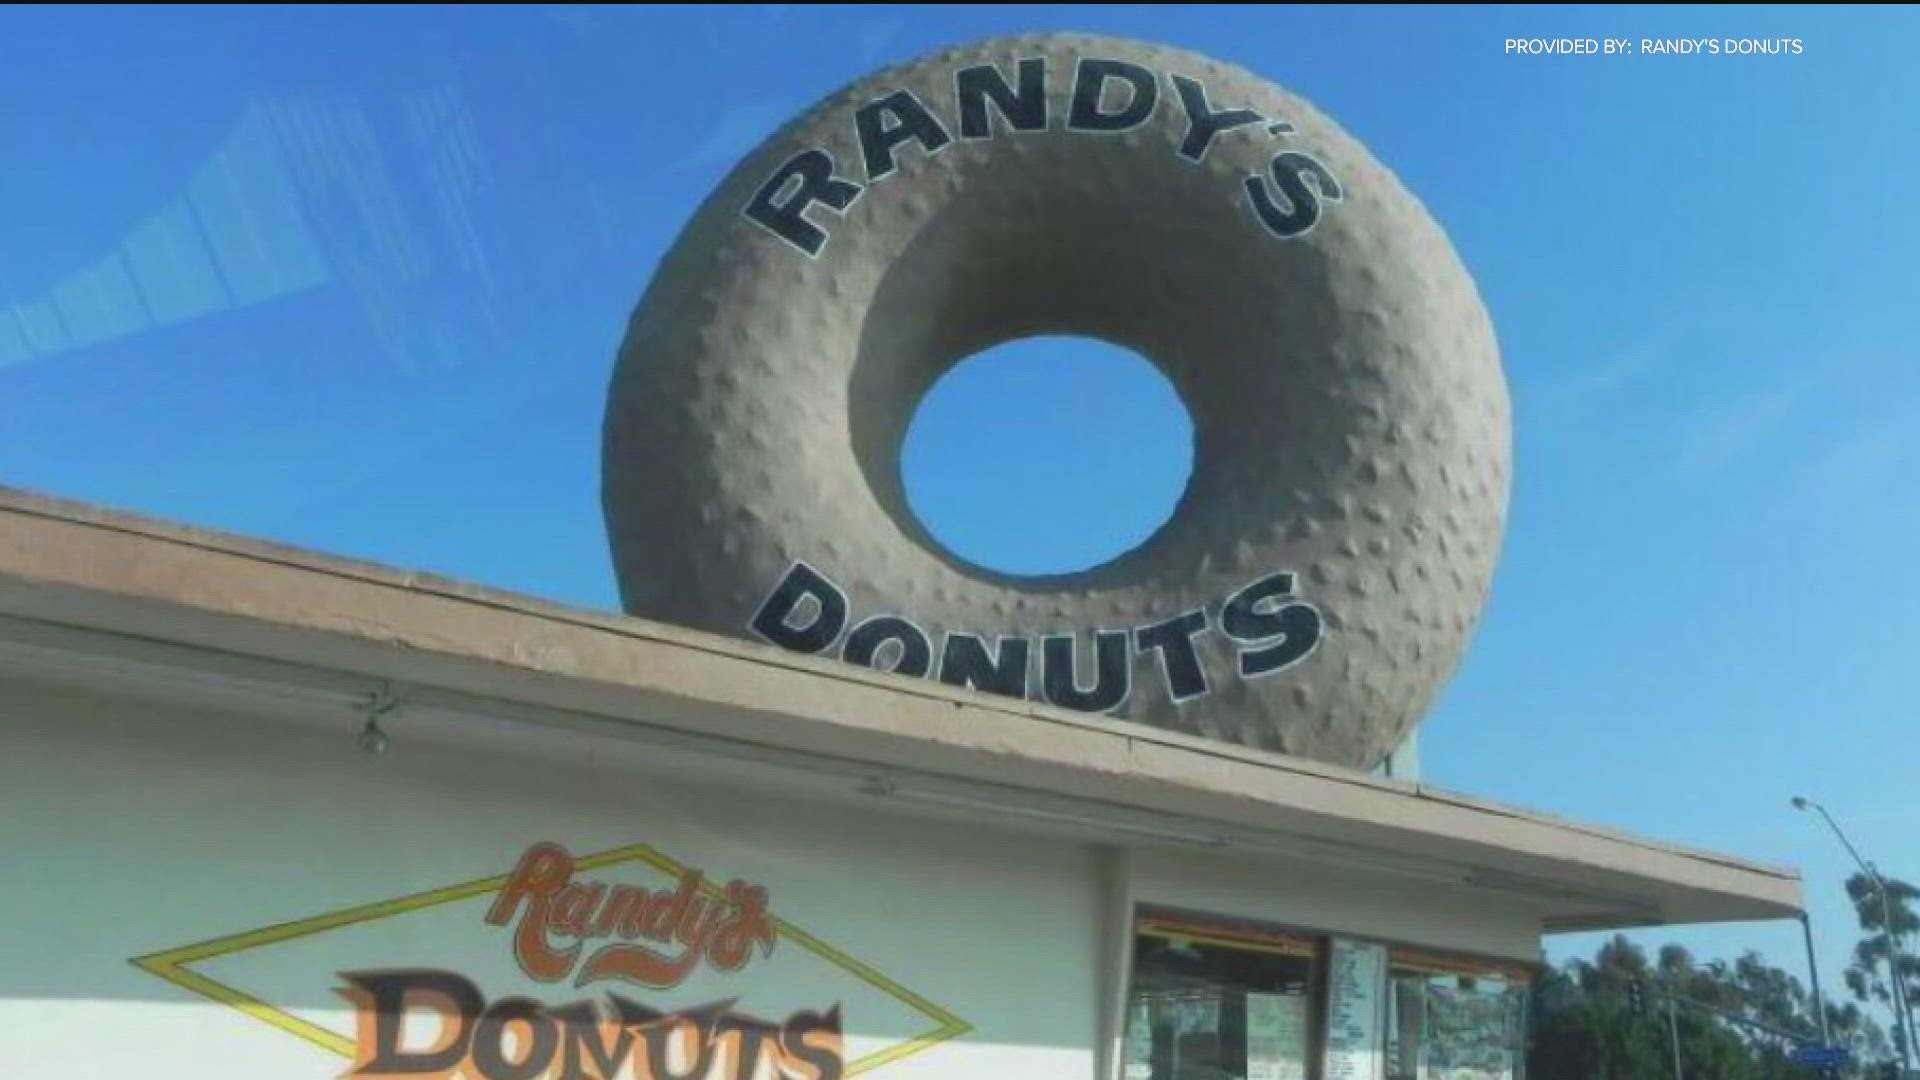 A San Diegan will lead the way for ten Randy's Donuts locations to open across San Diego, starting January 2023.